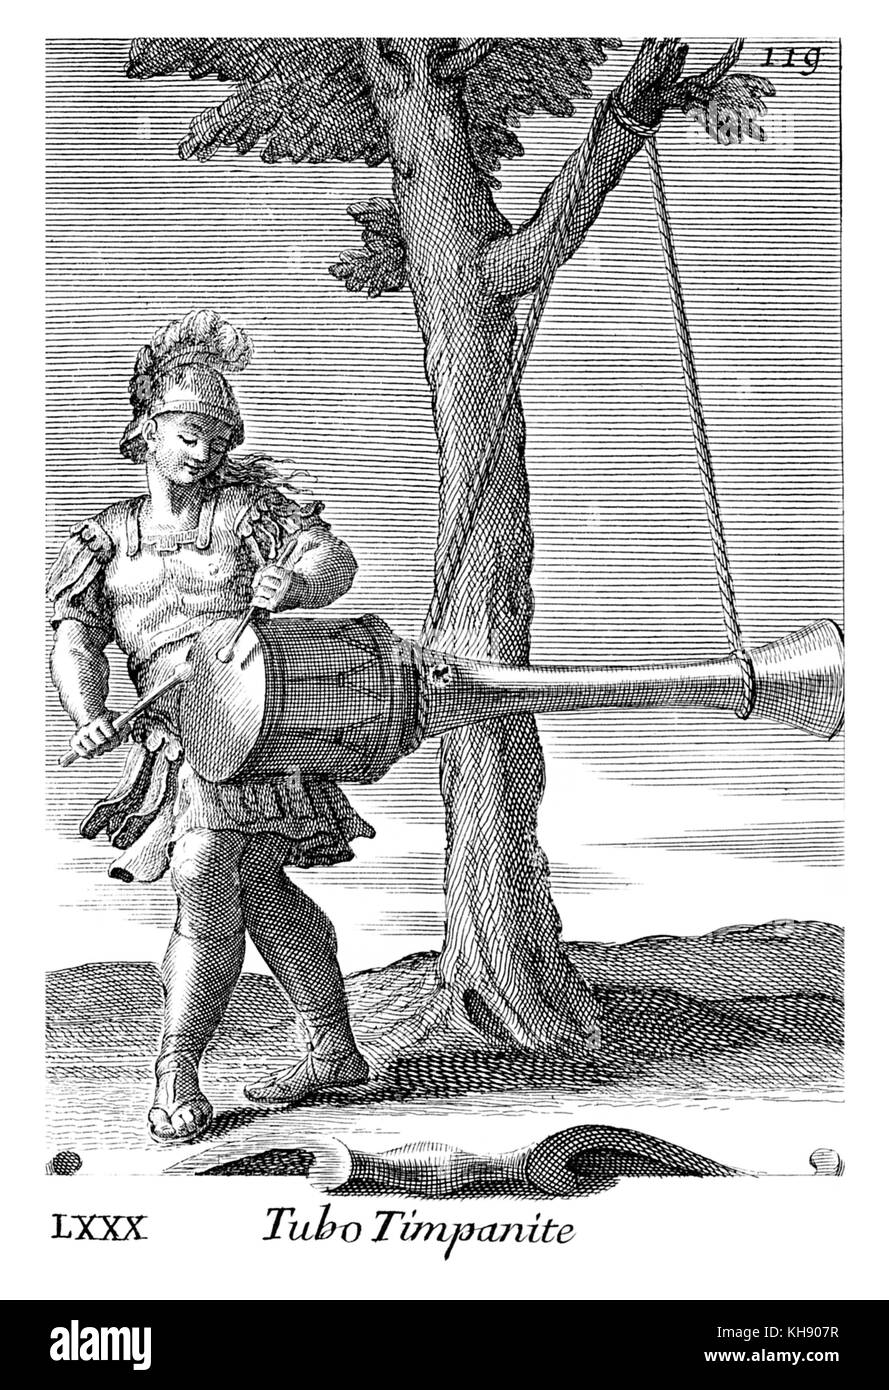 Tubo Timpanite. Drum with resonating tube, played with beaters by musician in ancient military costume.Caption reads Tubo Timpanite. Illustration from Filippo Bonanni's  'Gabinetto Armonico'  published in 1723, Illustration 80. Engraving by Arnold van Westerhout. Stock Photo